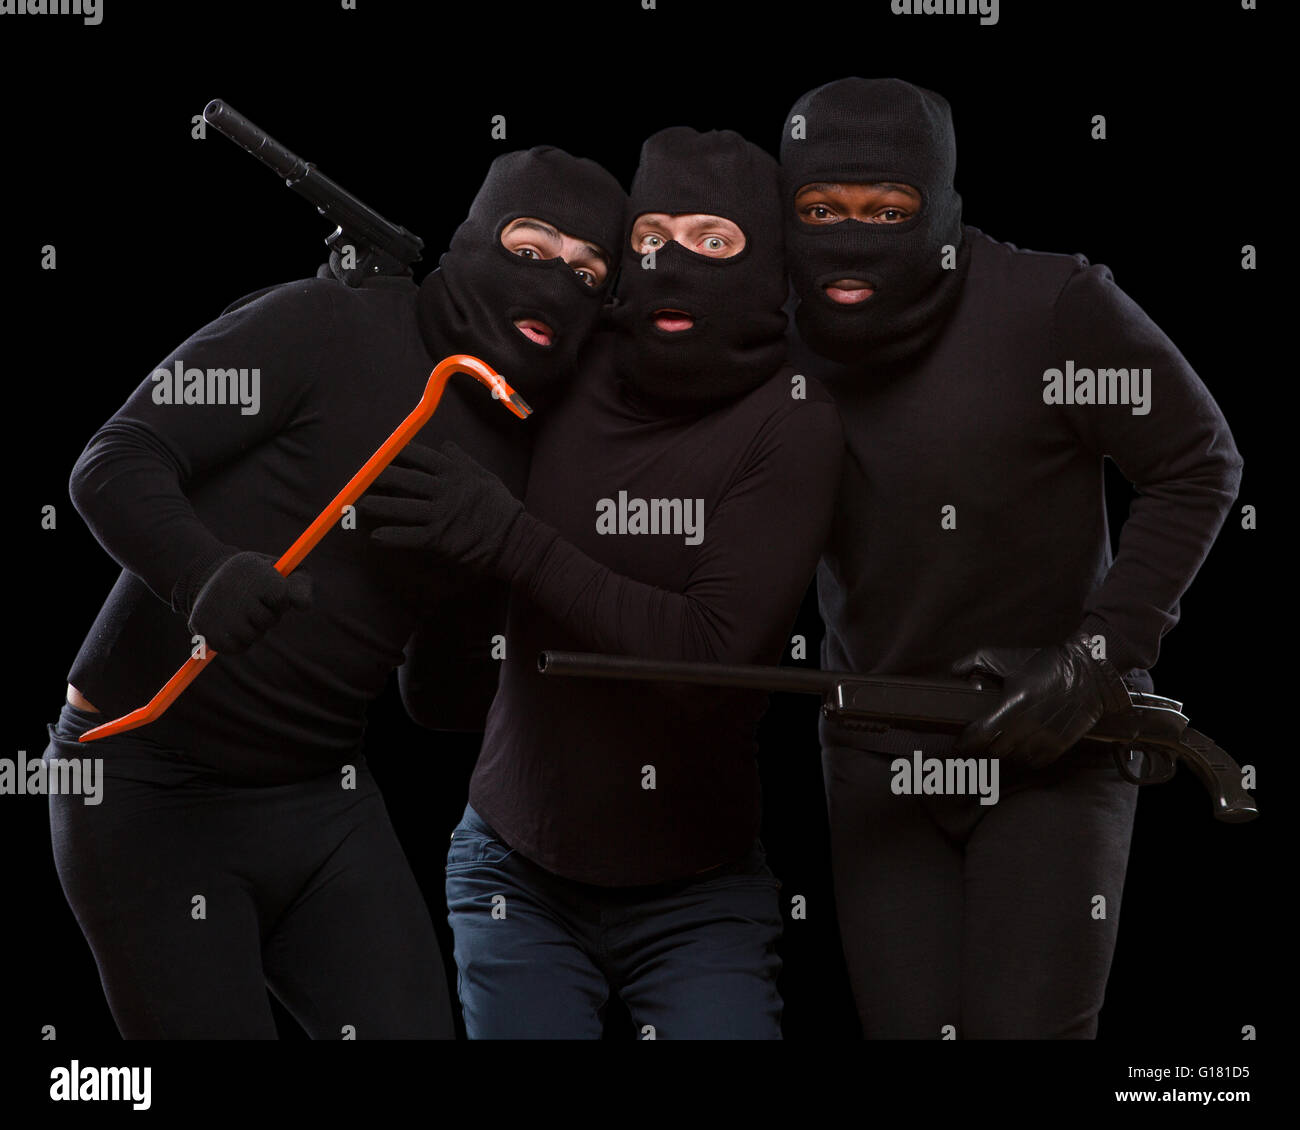 Thieves in masks Stock Photo